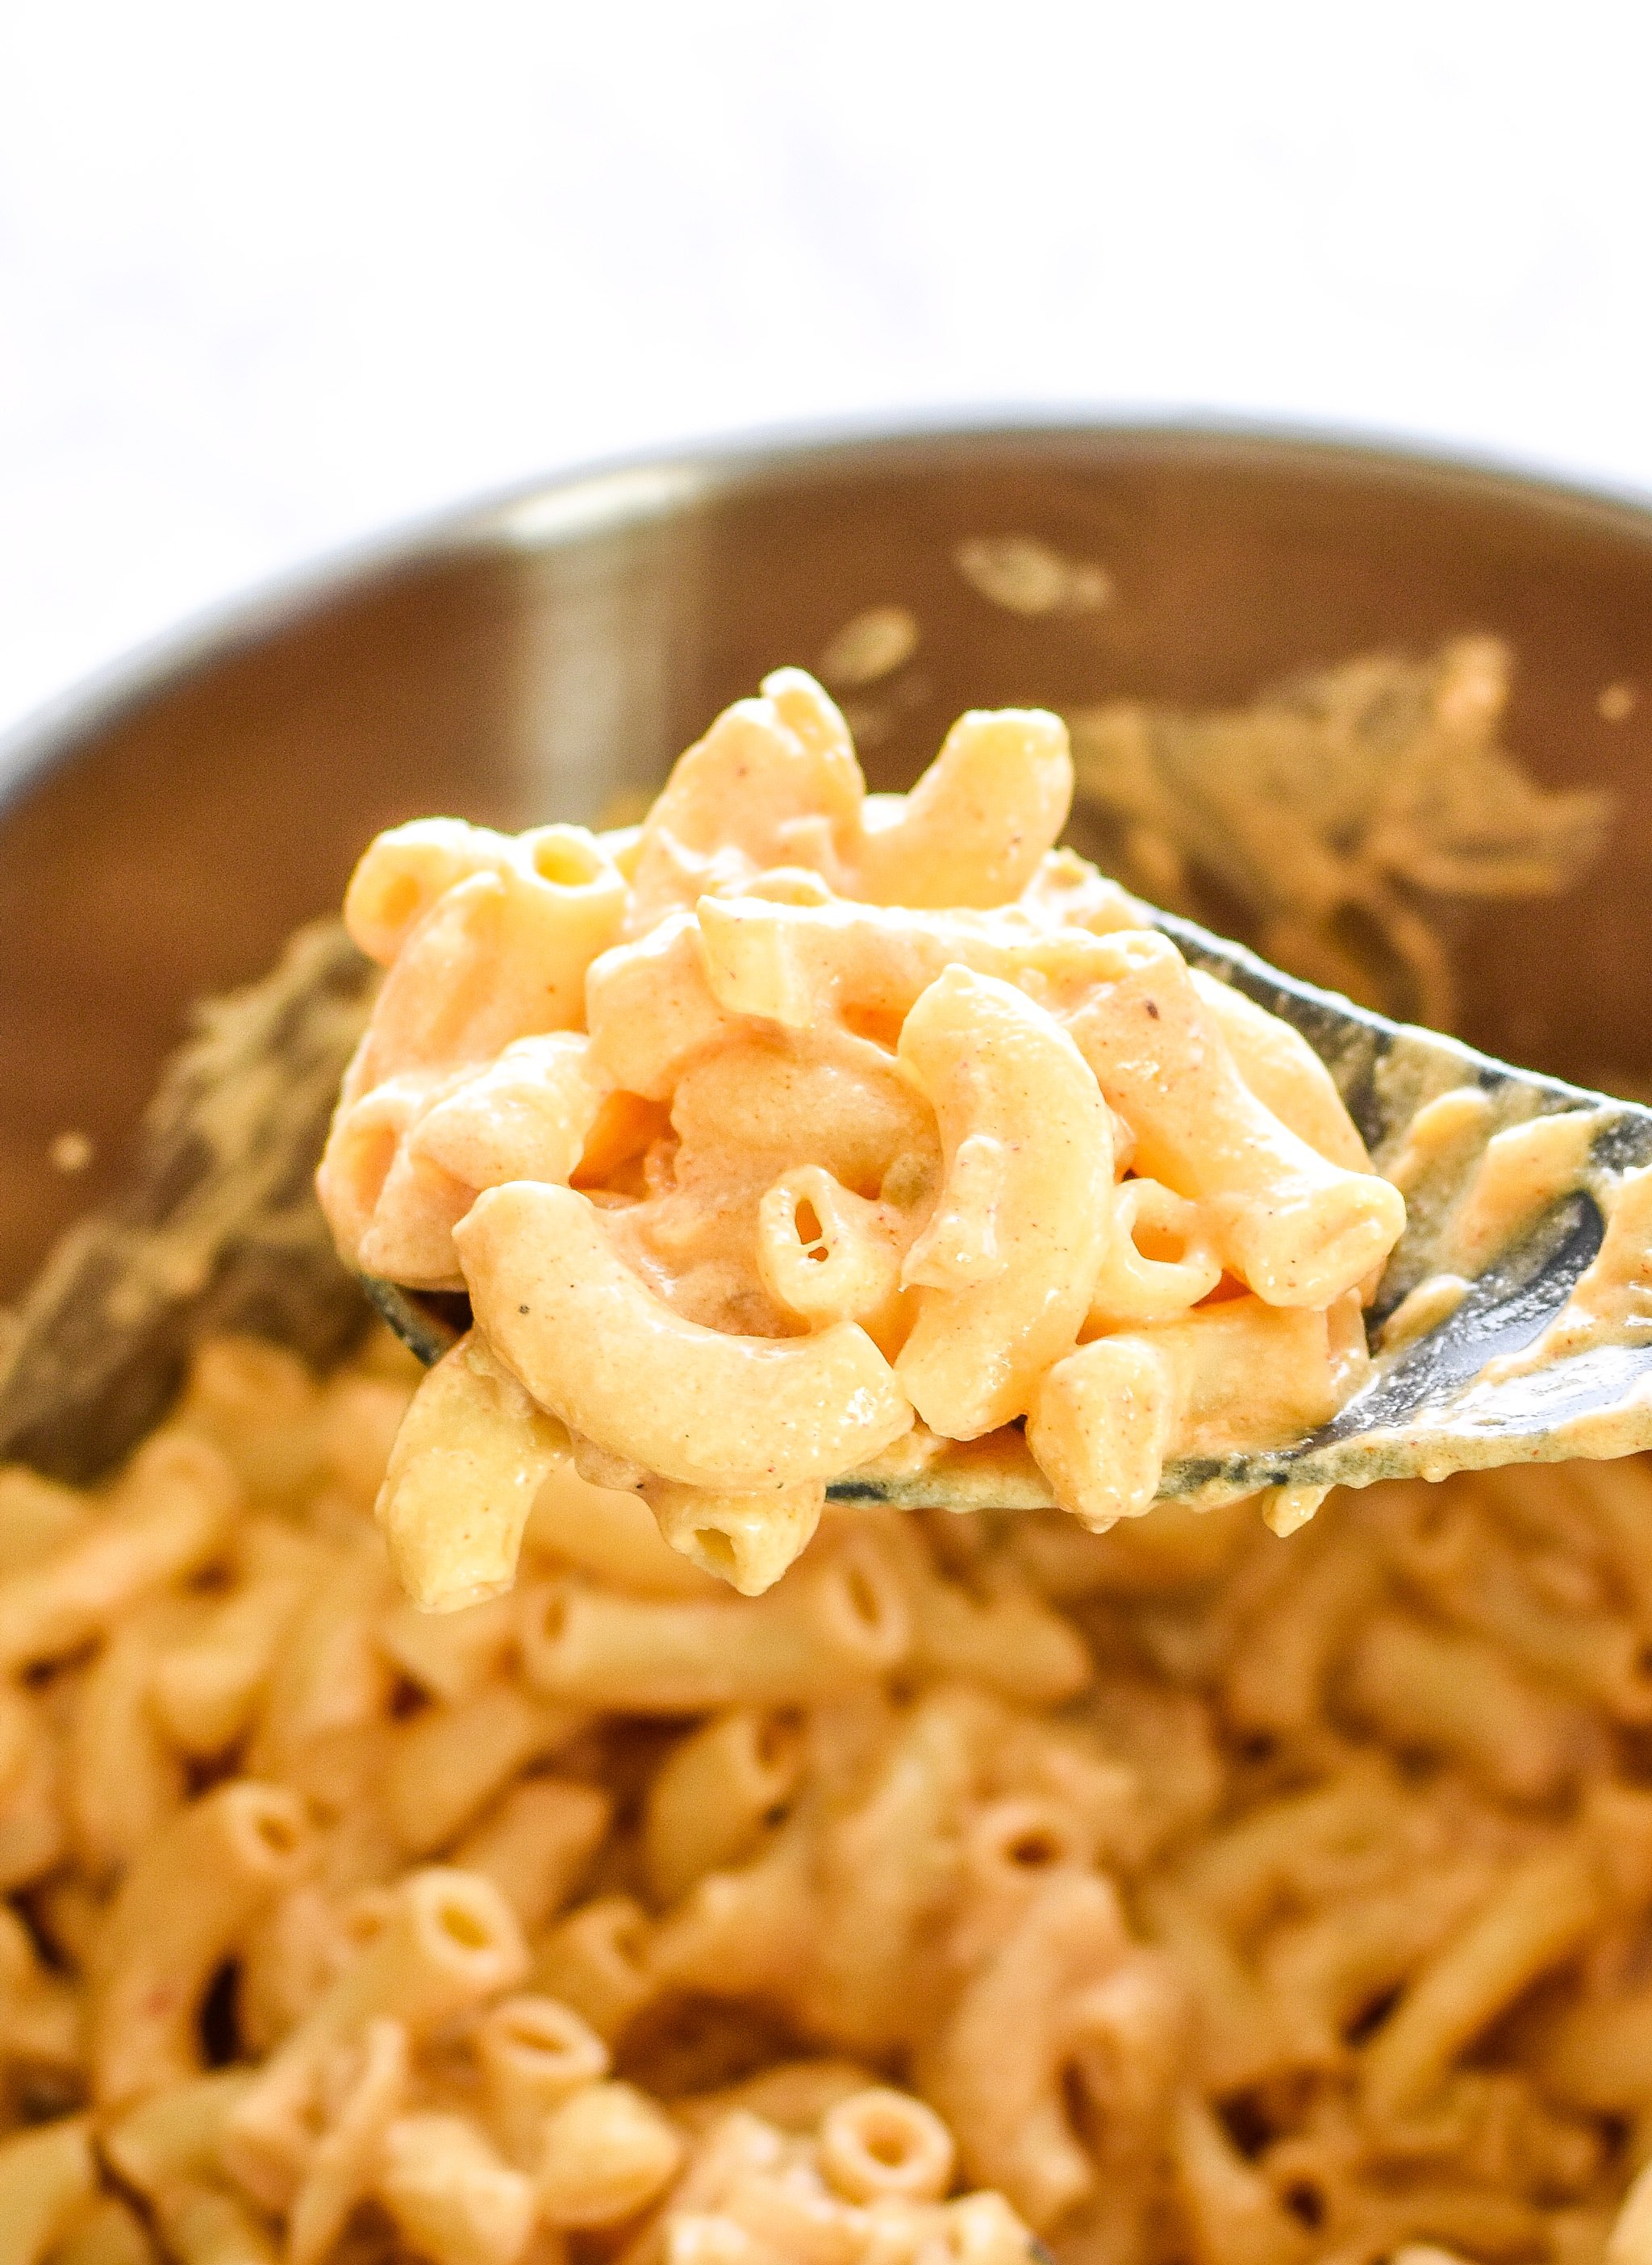 A big spoonful of smoky white cheddar camping mac and cheese.